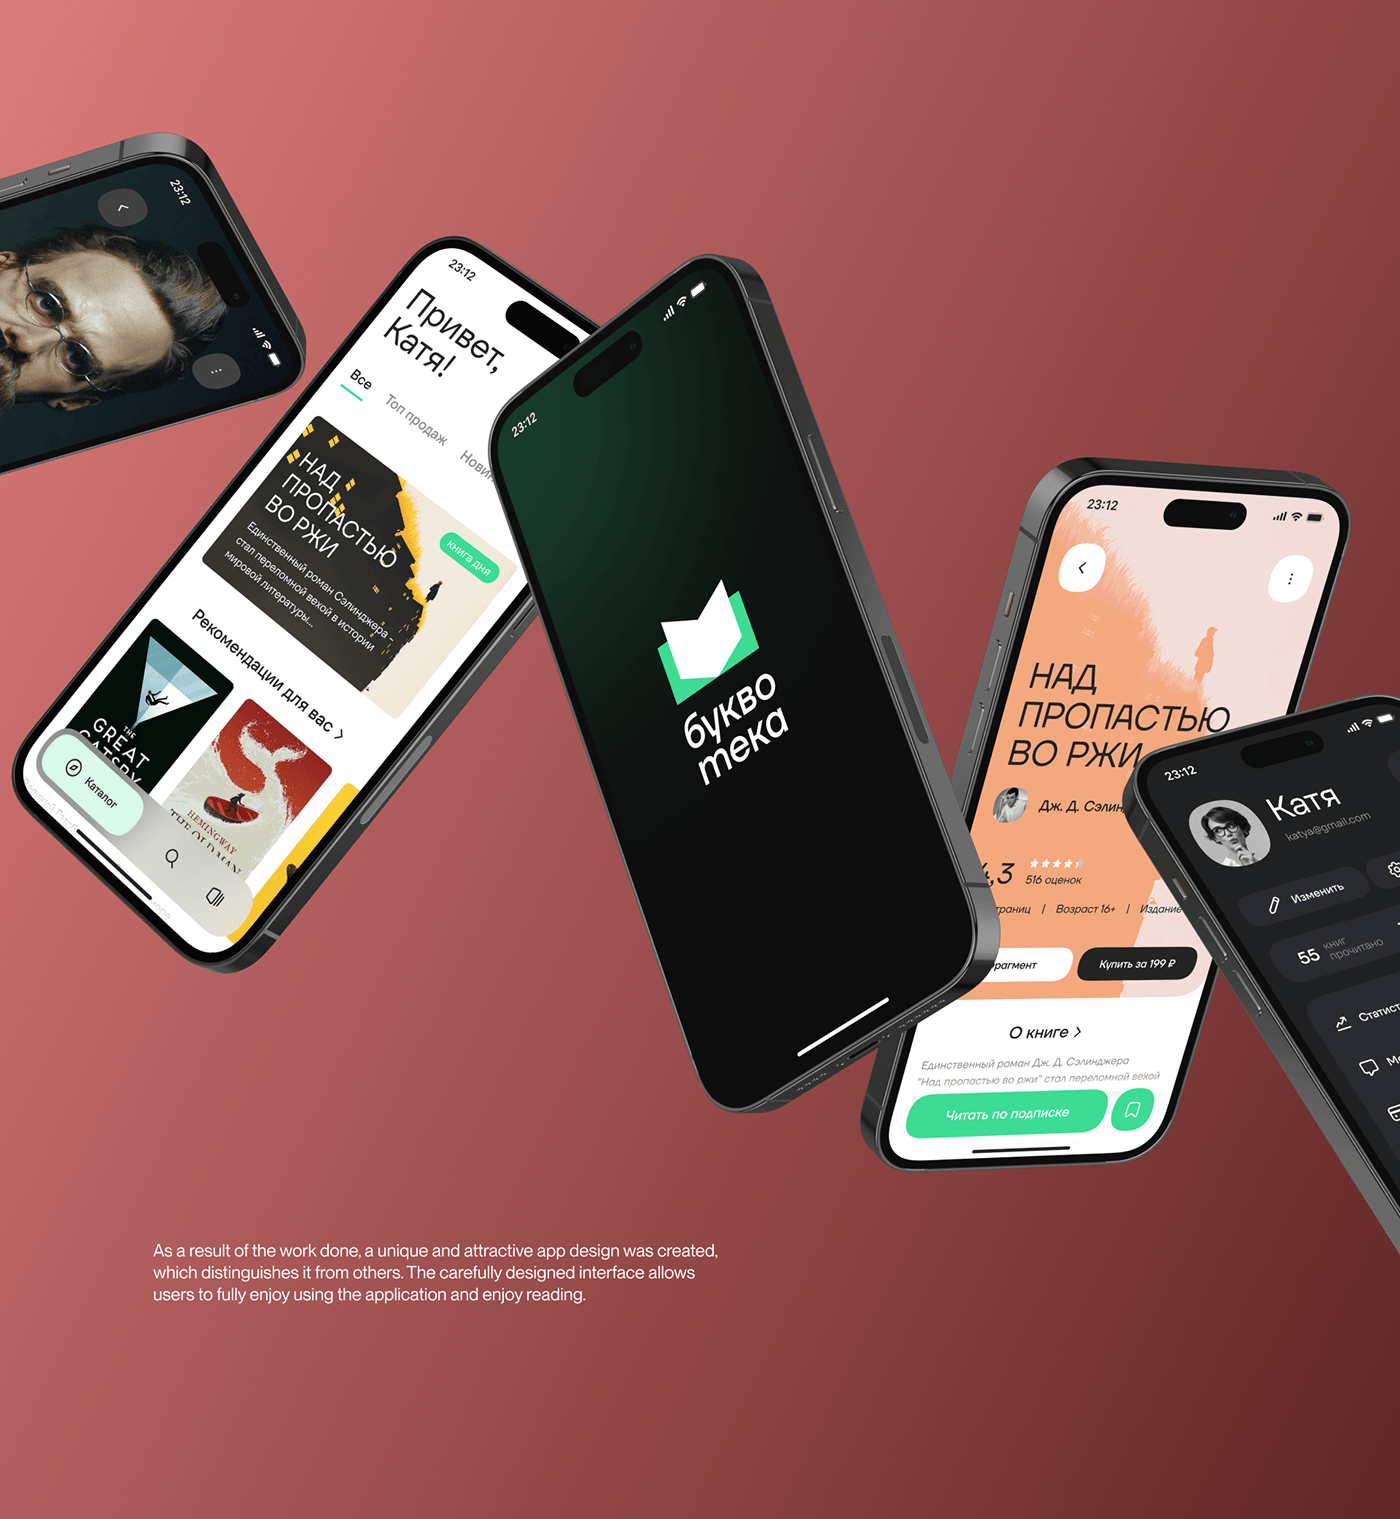 Mobile app mobile UI/UX book app brand identity branding  visual identity user interface contented